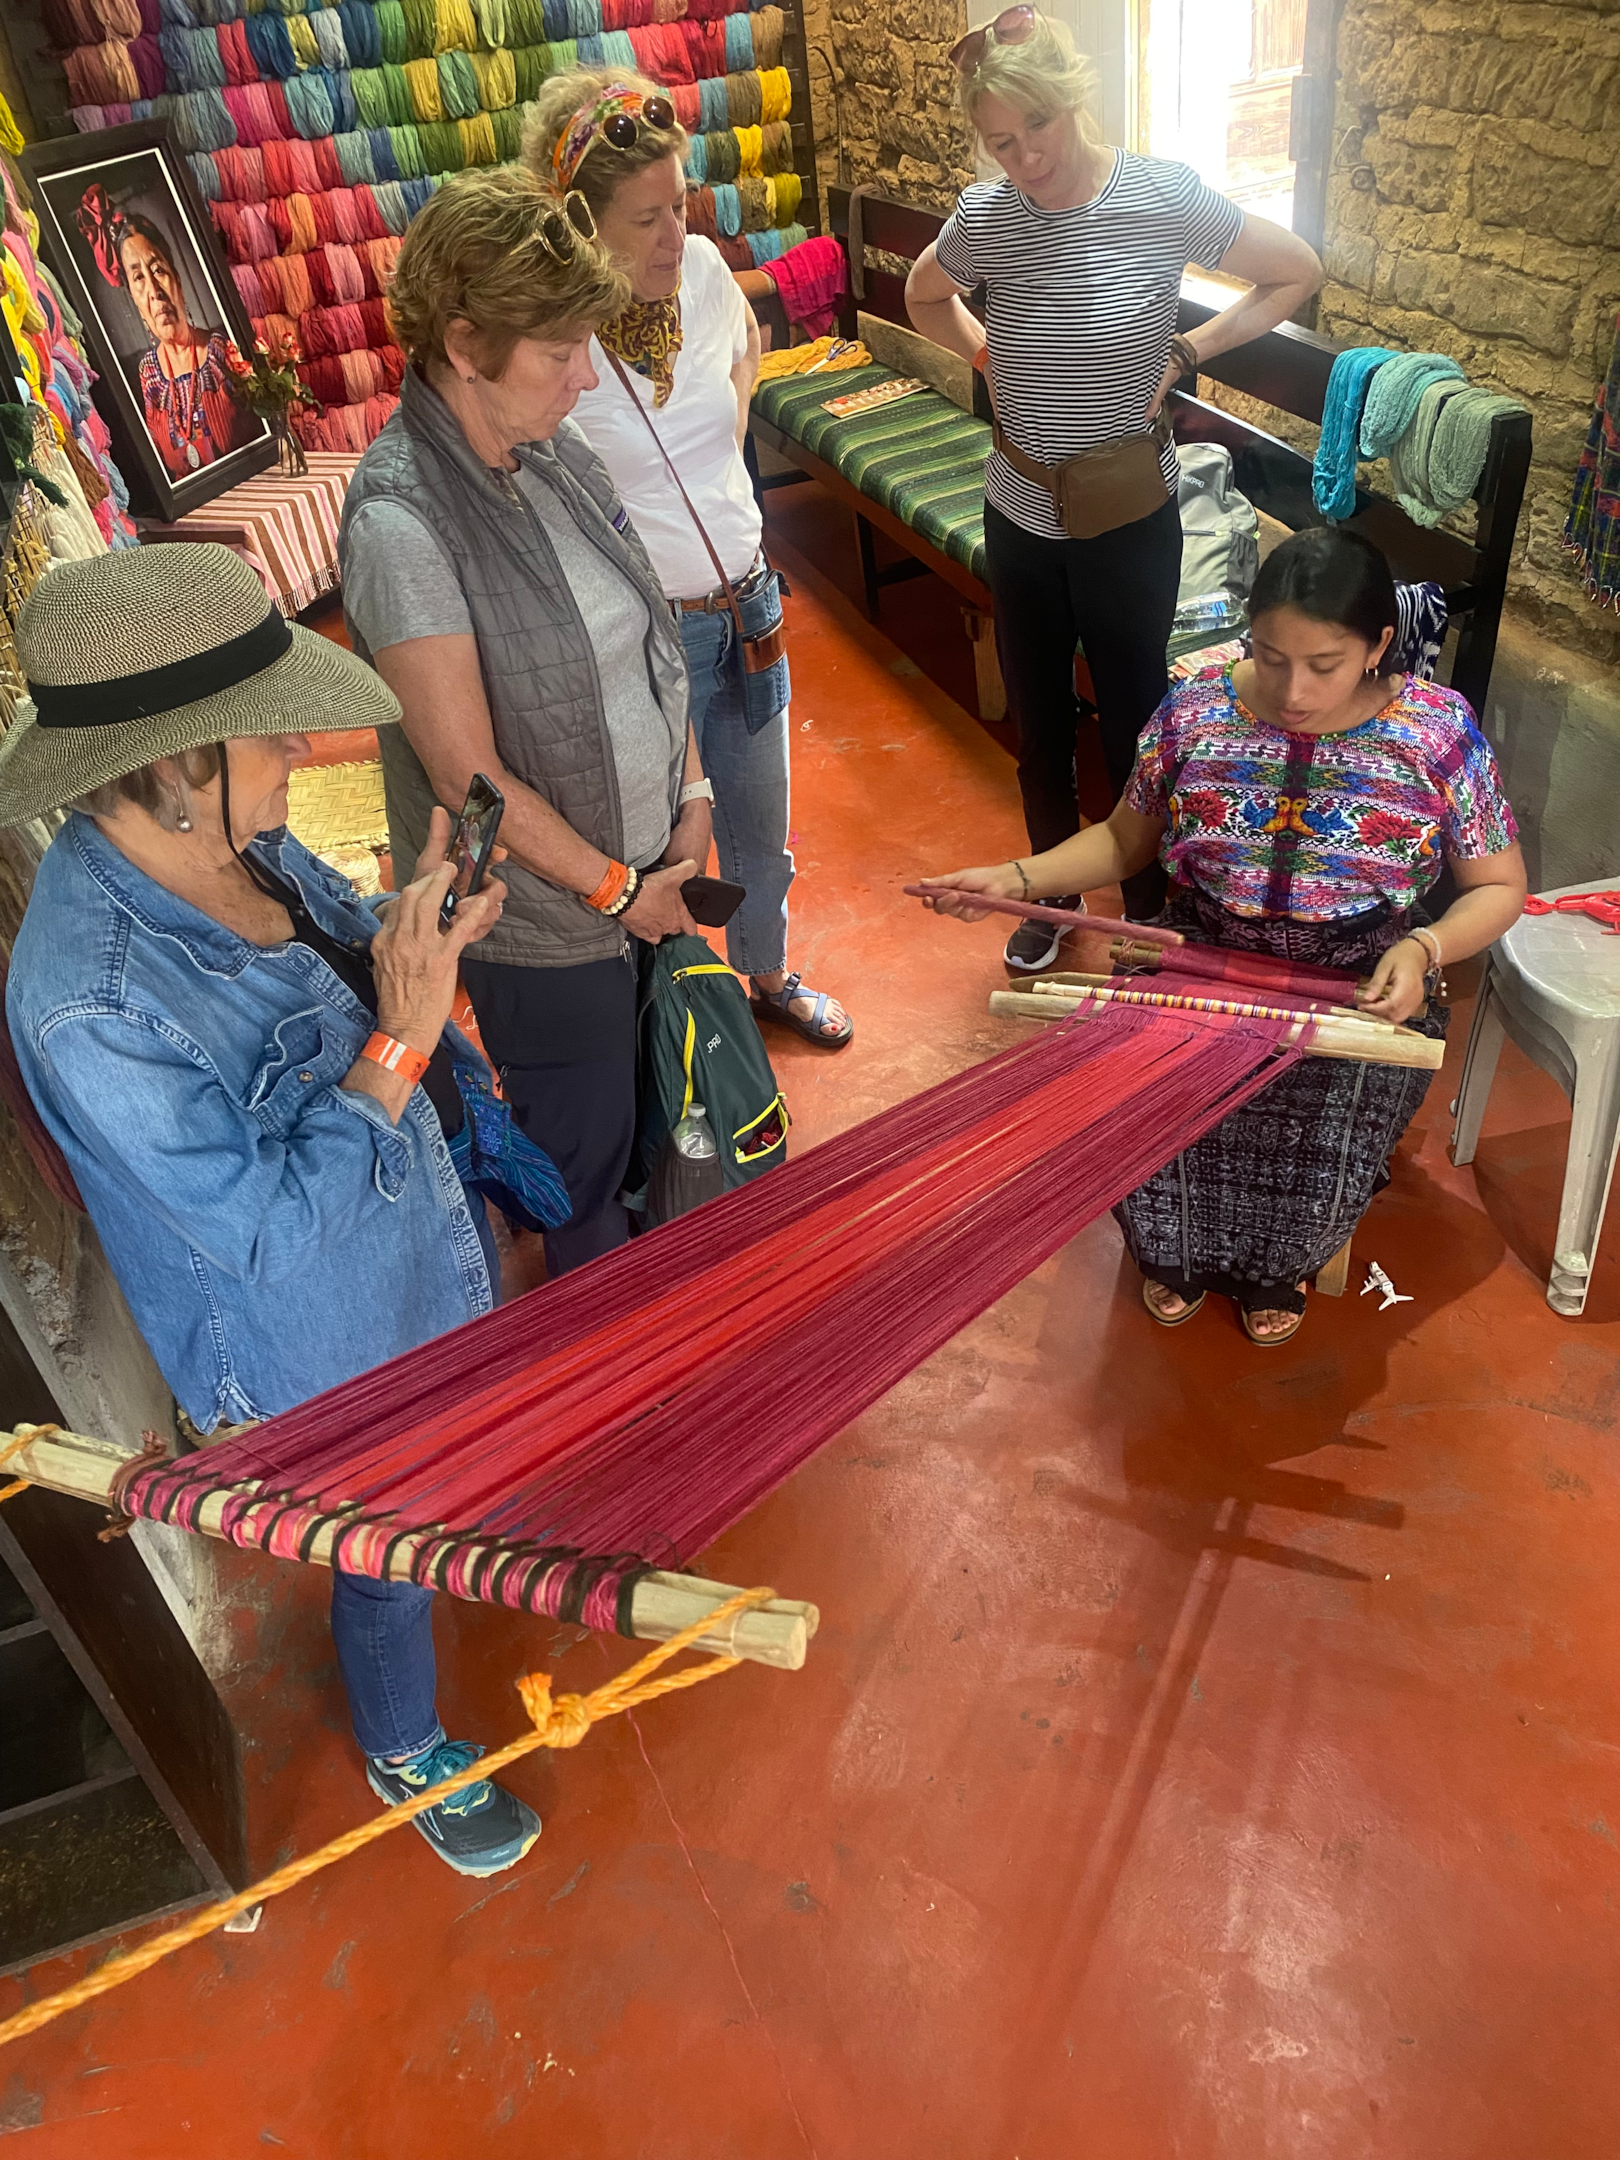 Women's weaving cooperatives offer demonstrations of their art form.